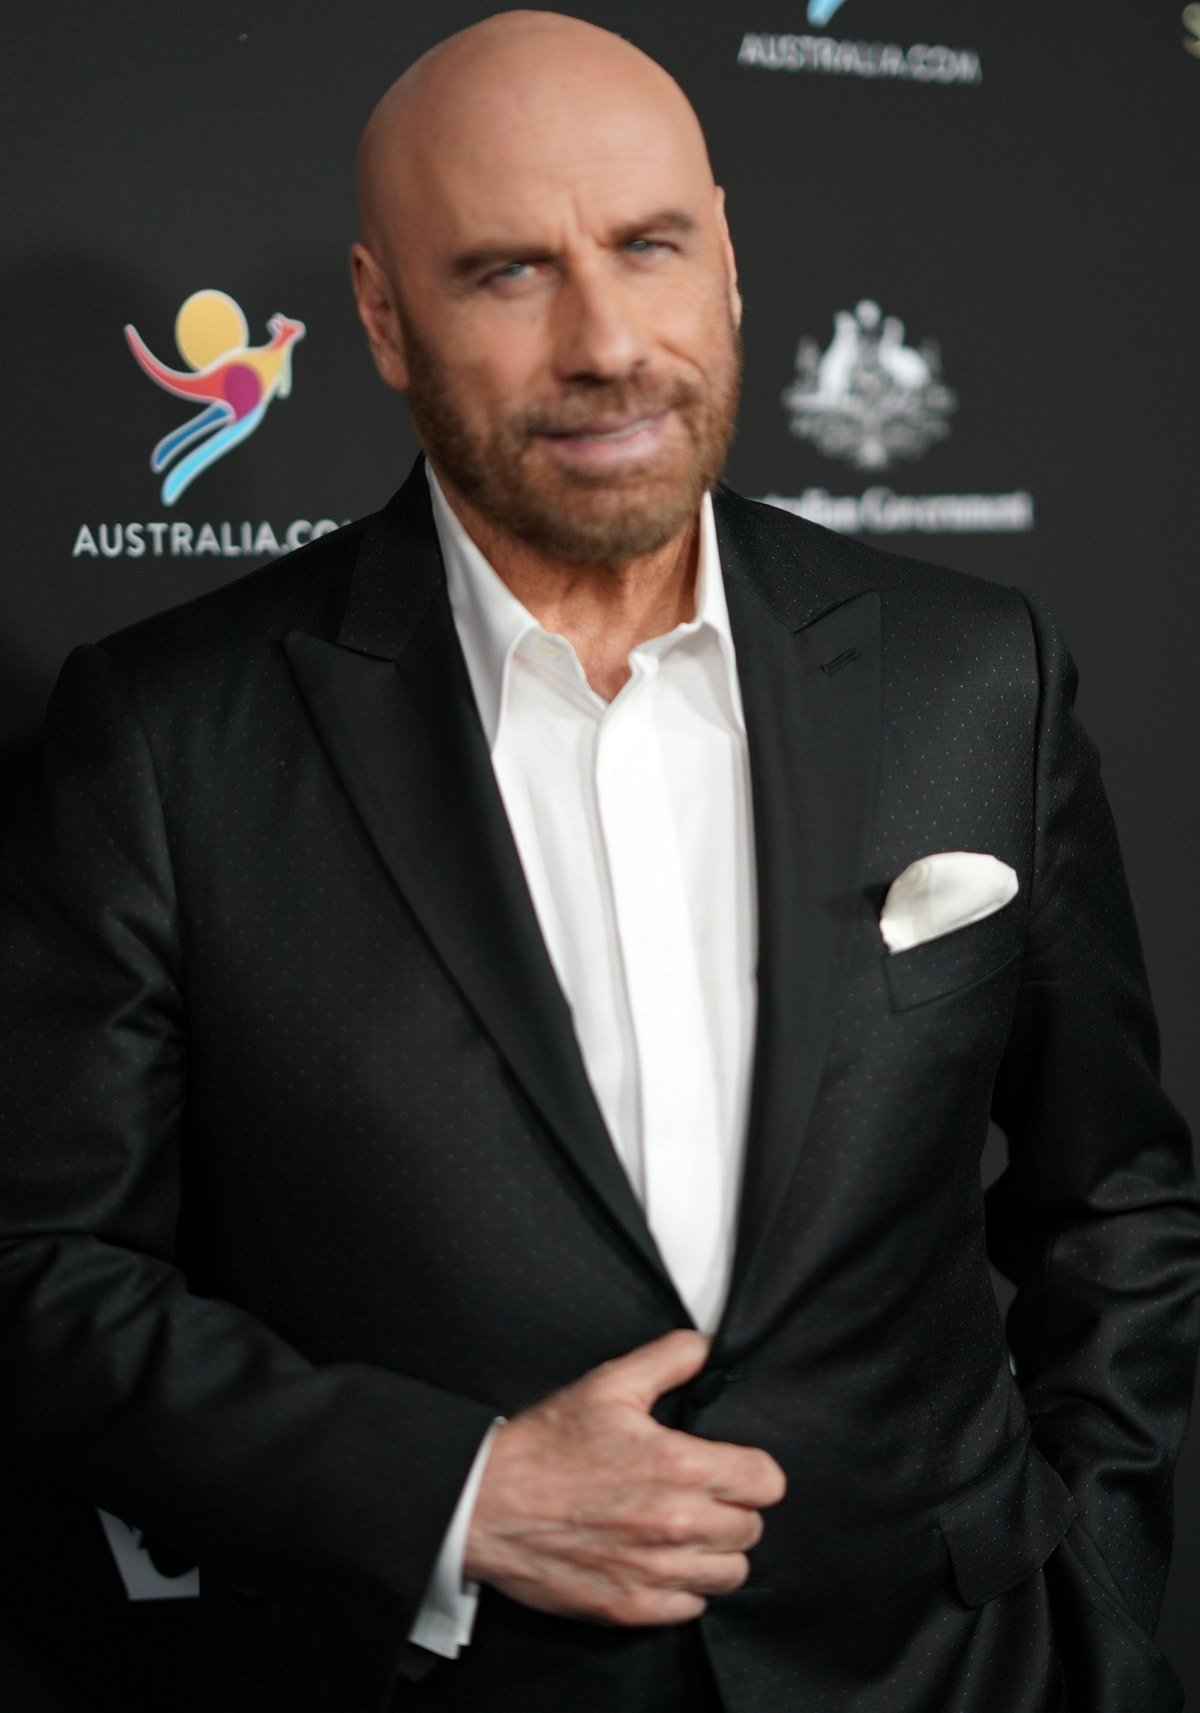 John Travolta at the G’Day USA Standing Together event